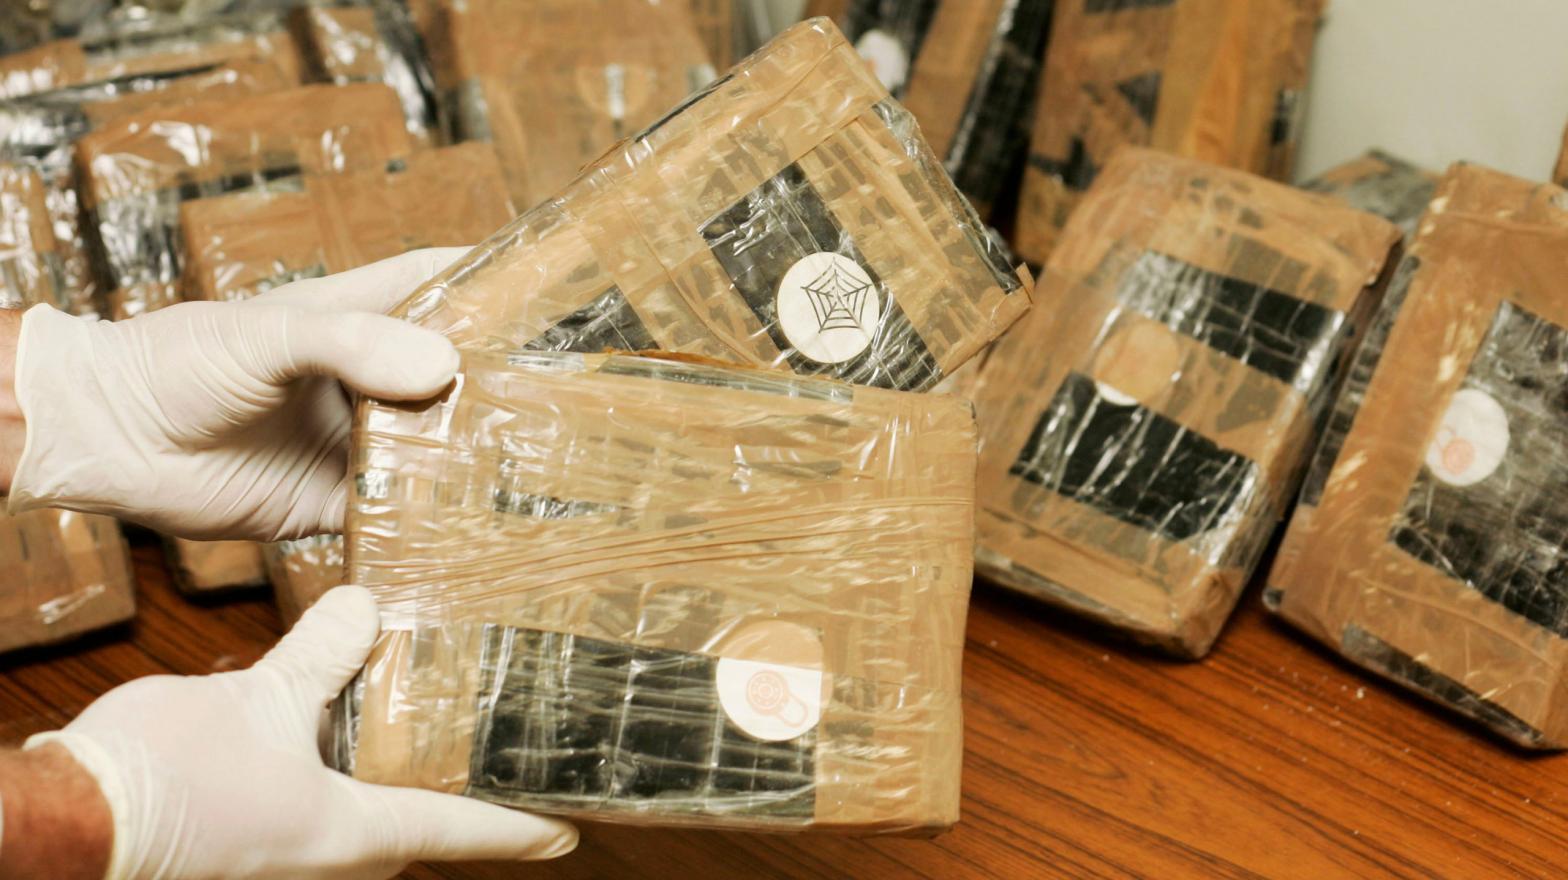 Belgian federal police handling seized cocaine in Brussels in April 2007; stock photo. (Photo: Mark Renders, Getty Images)